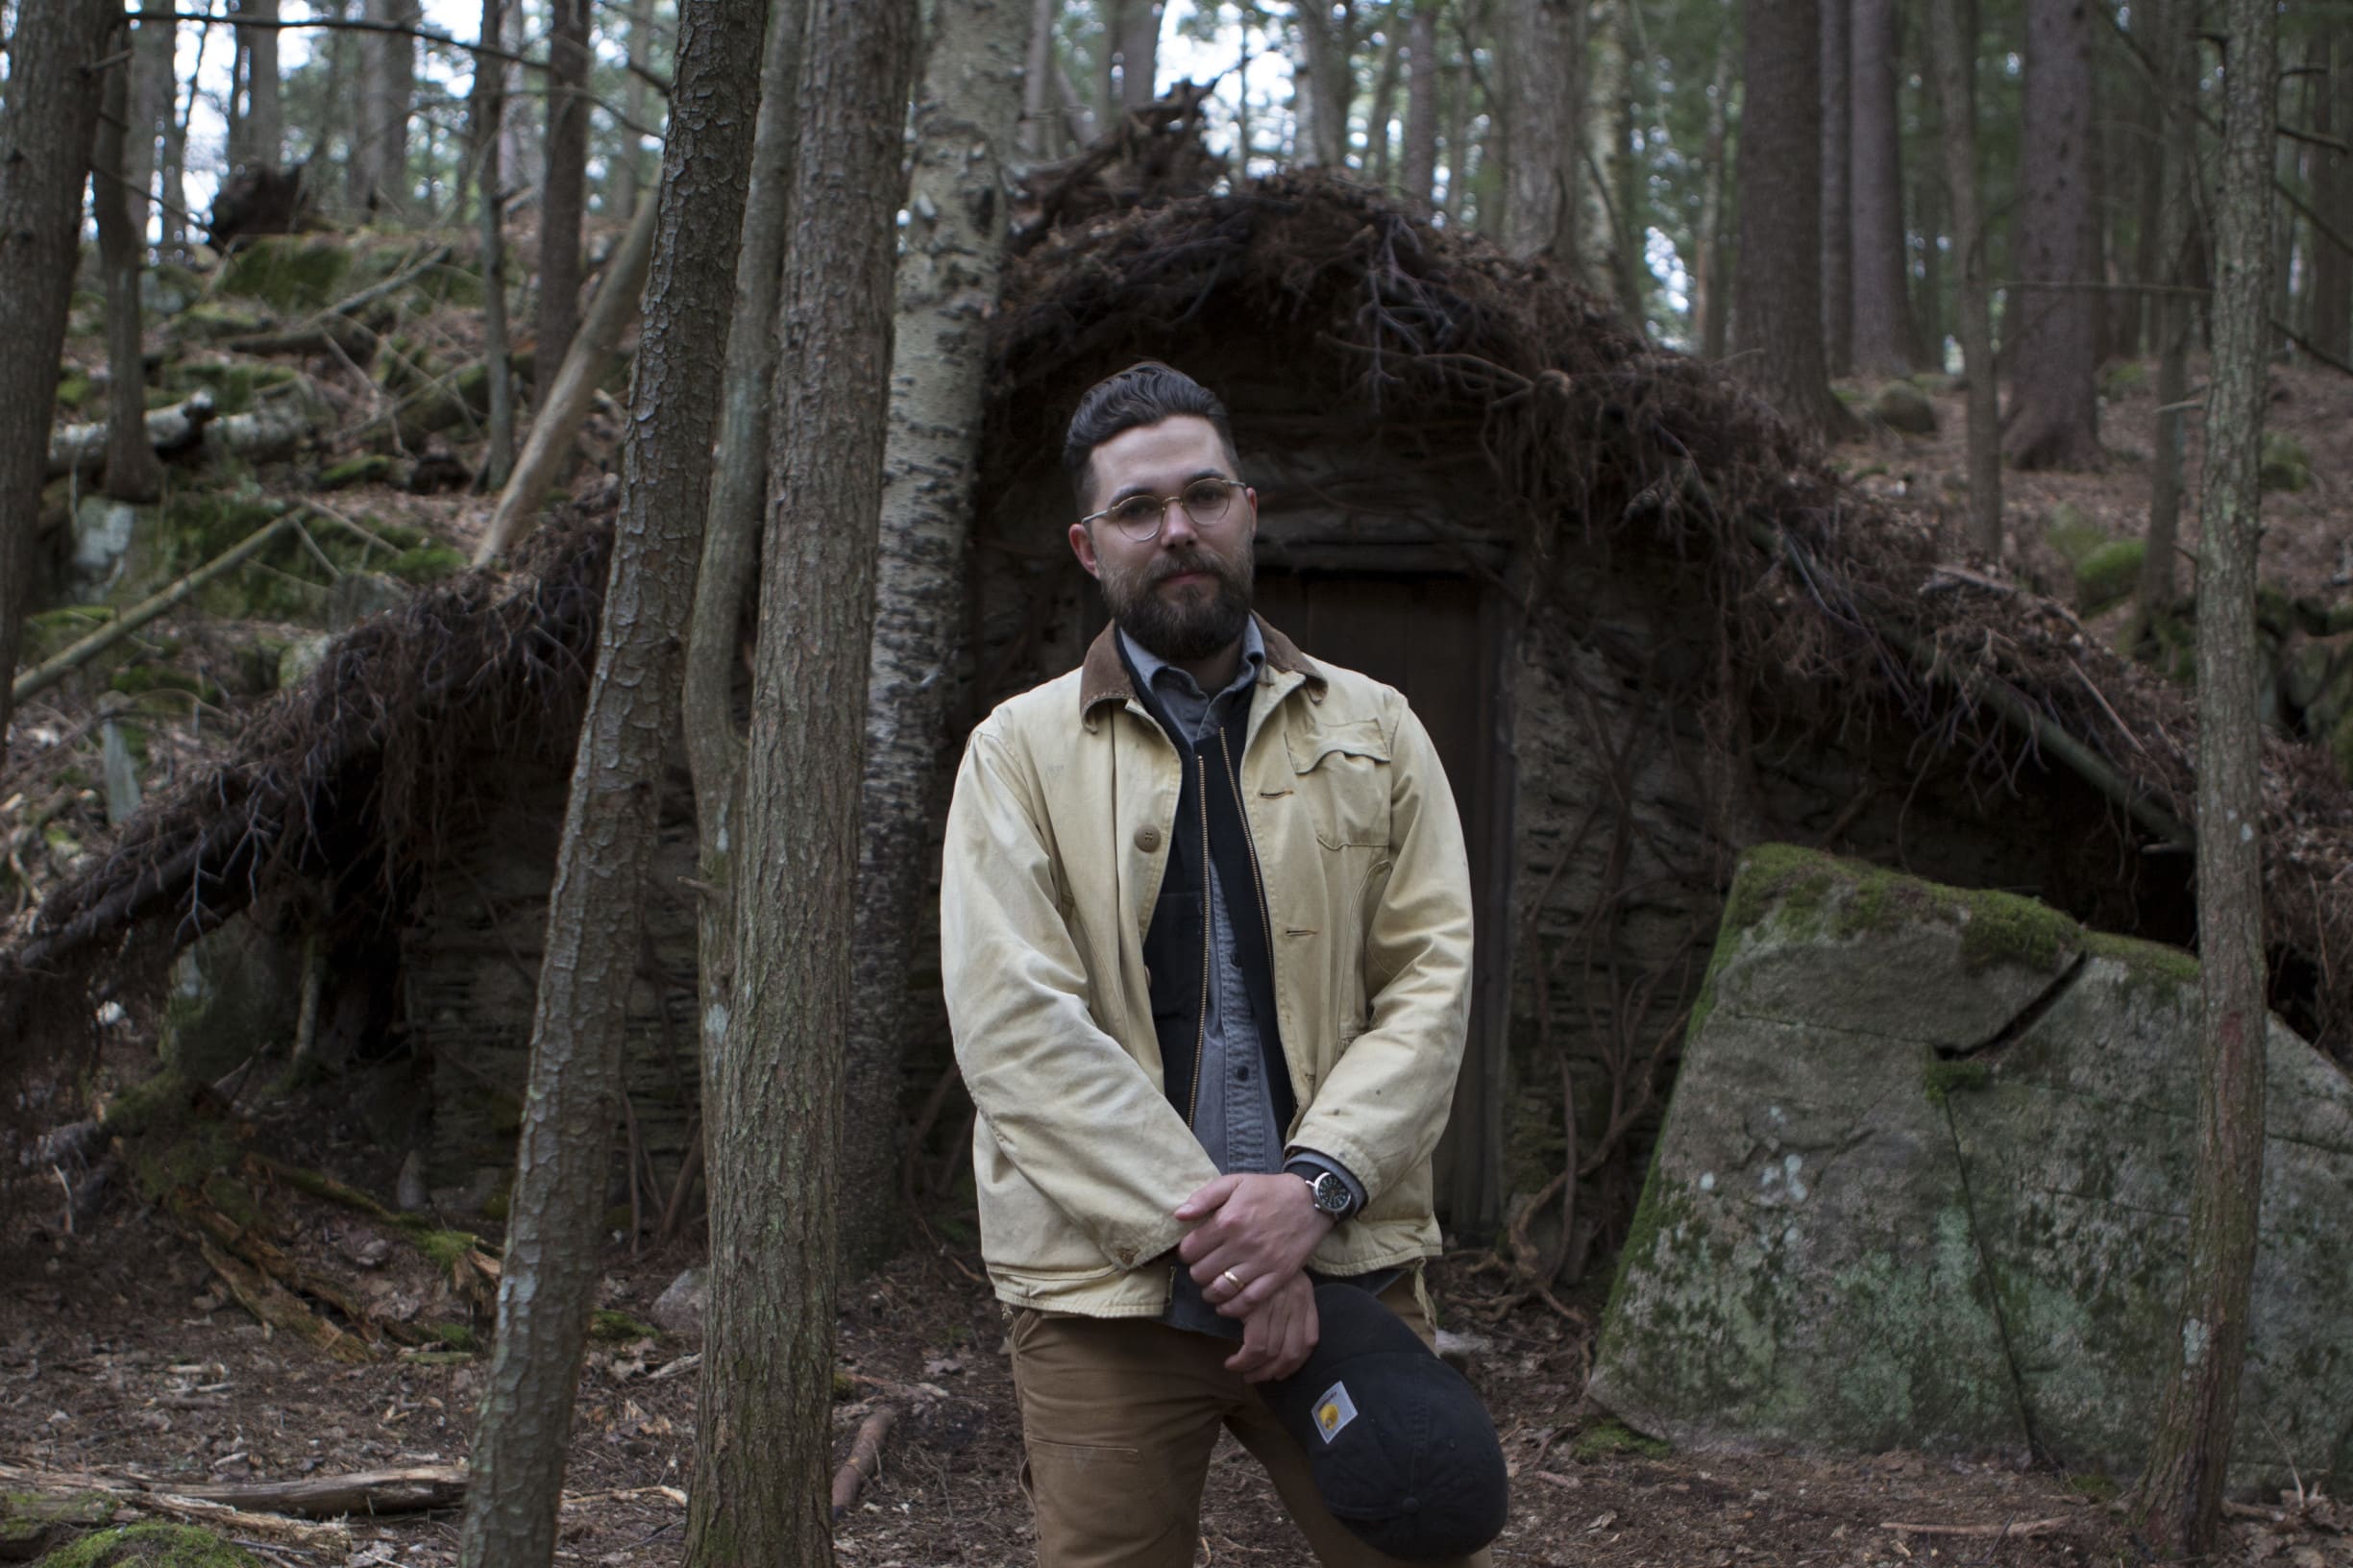 Designer-Turned-Director Robert Eggers Discusses His Horror Film ‘The Witch’